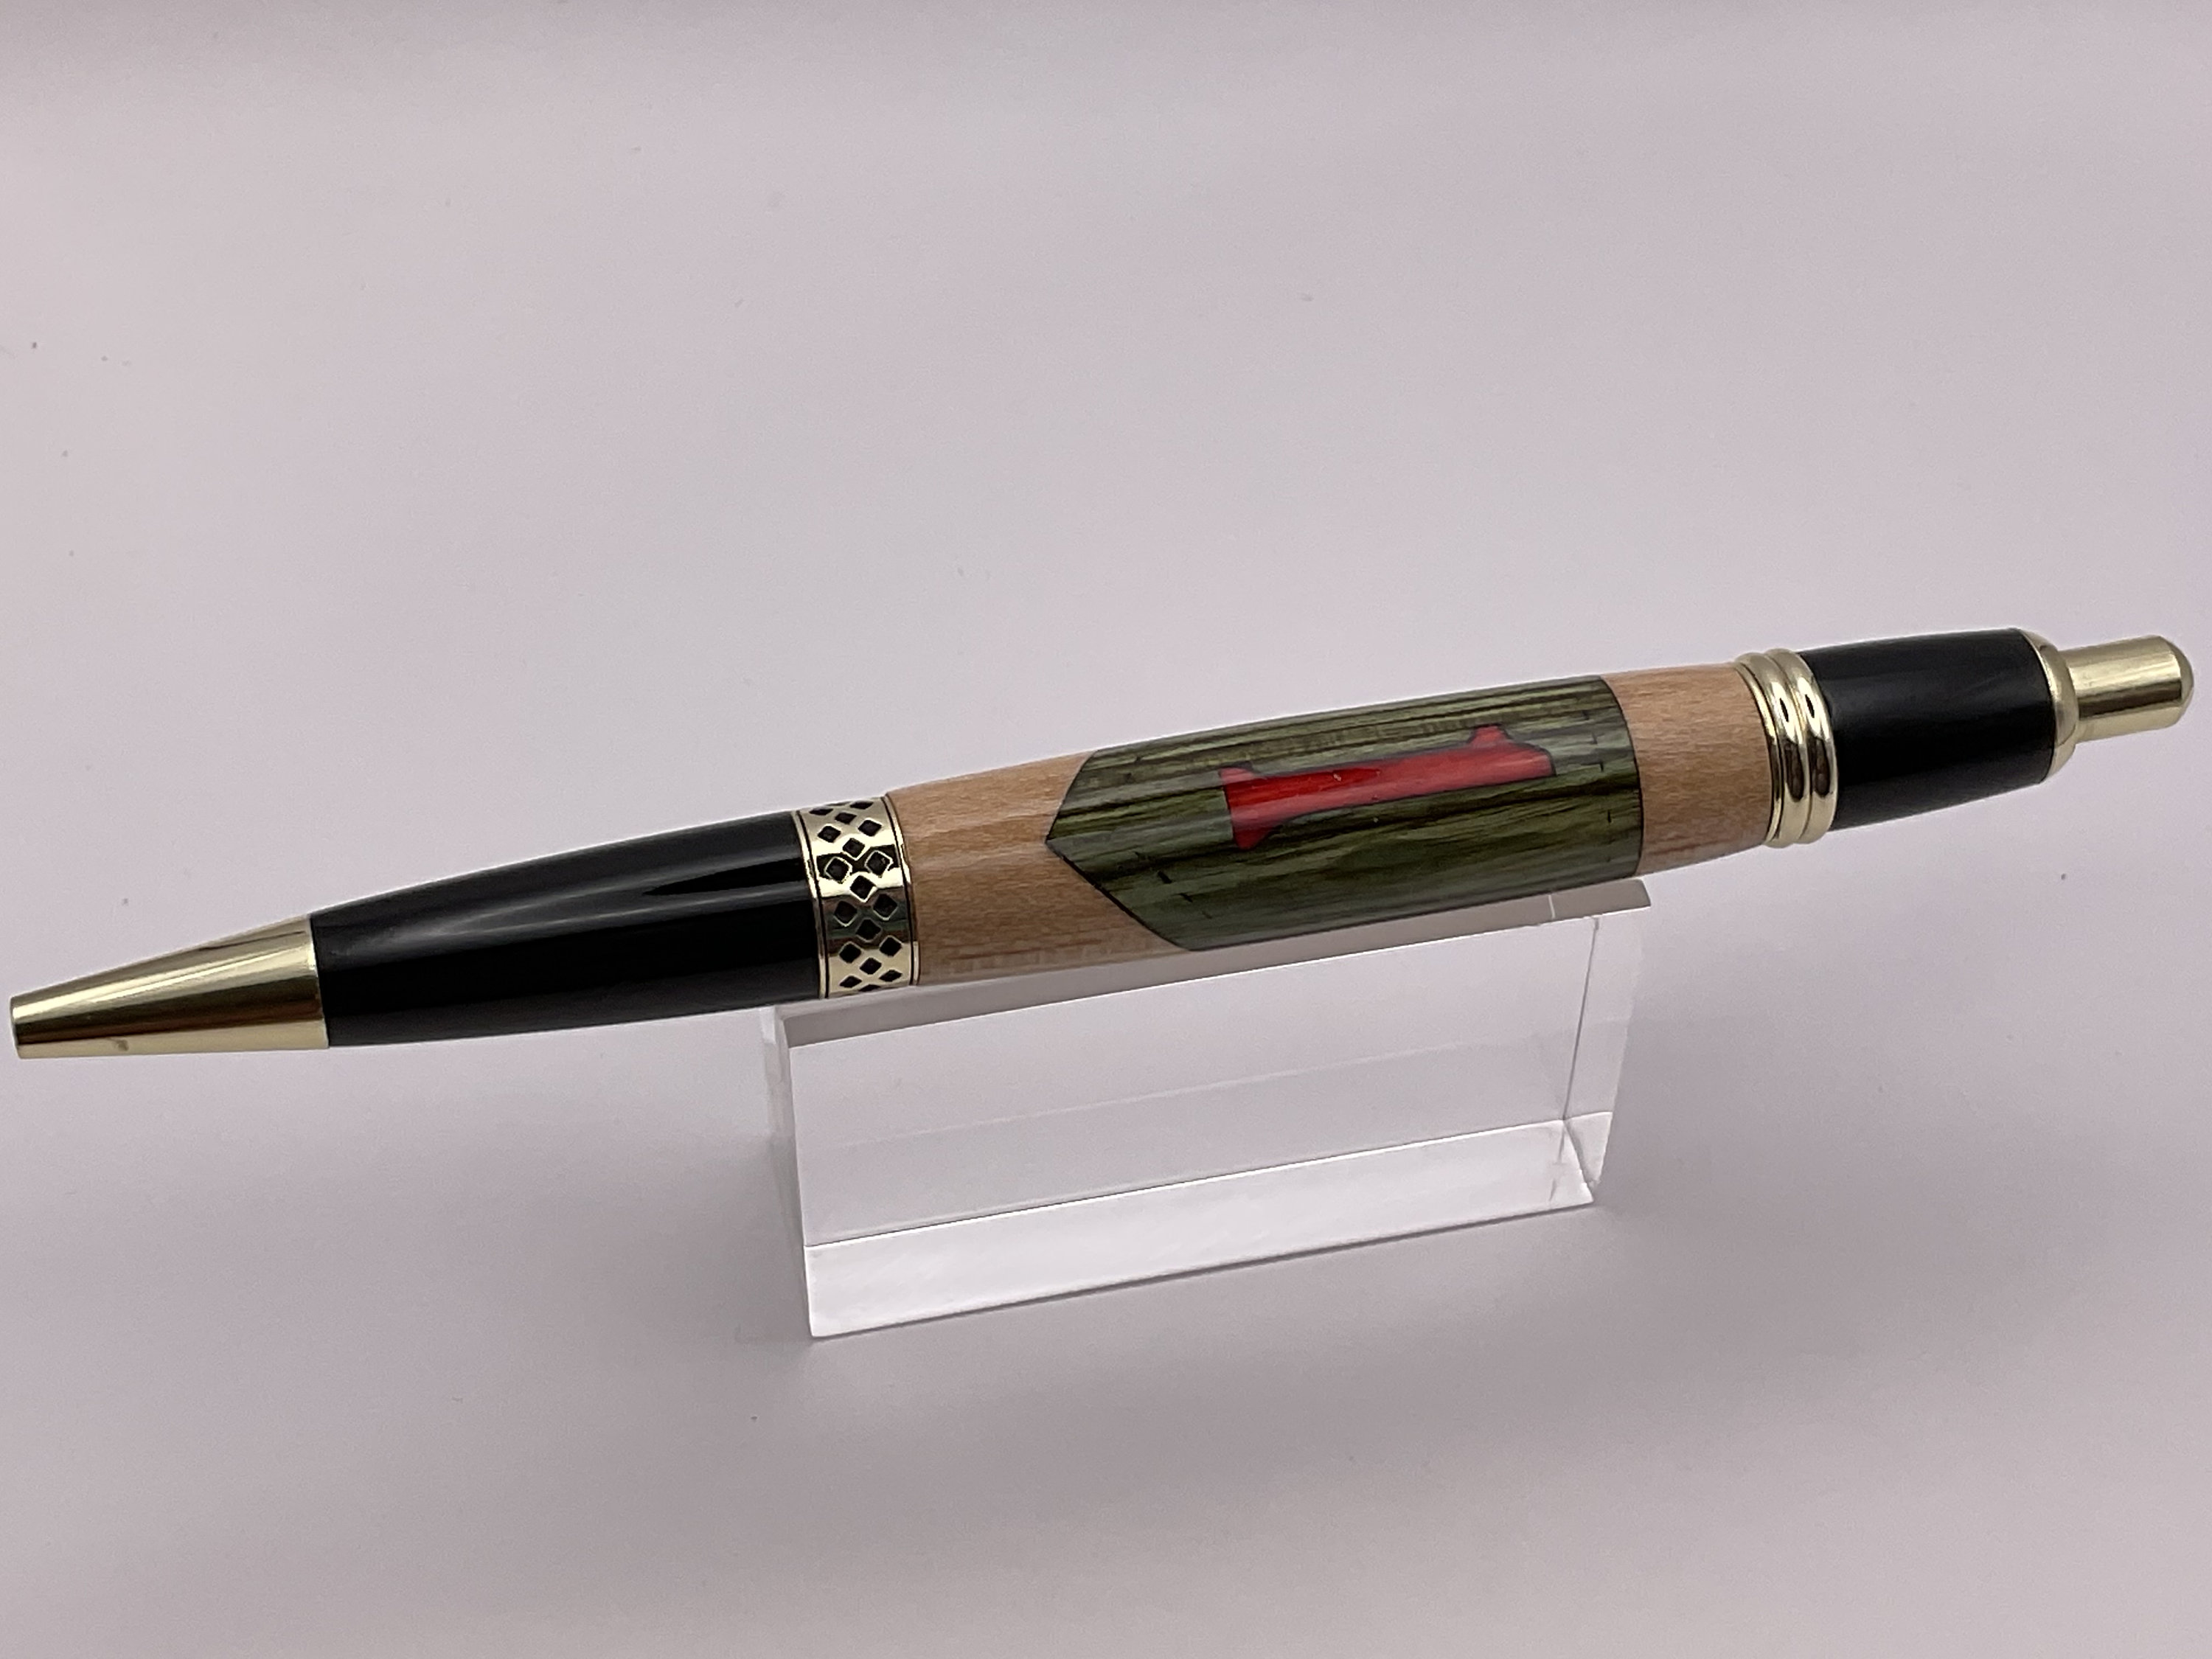 PKM-1 New Style Pen Kits for Pen Making Wood Turning 